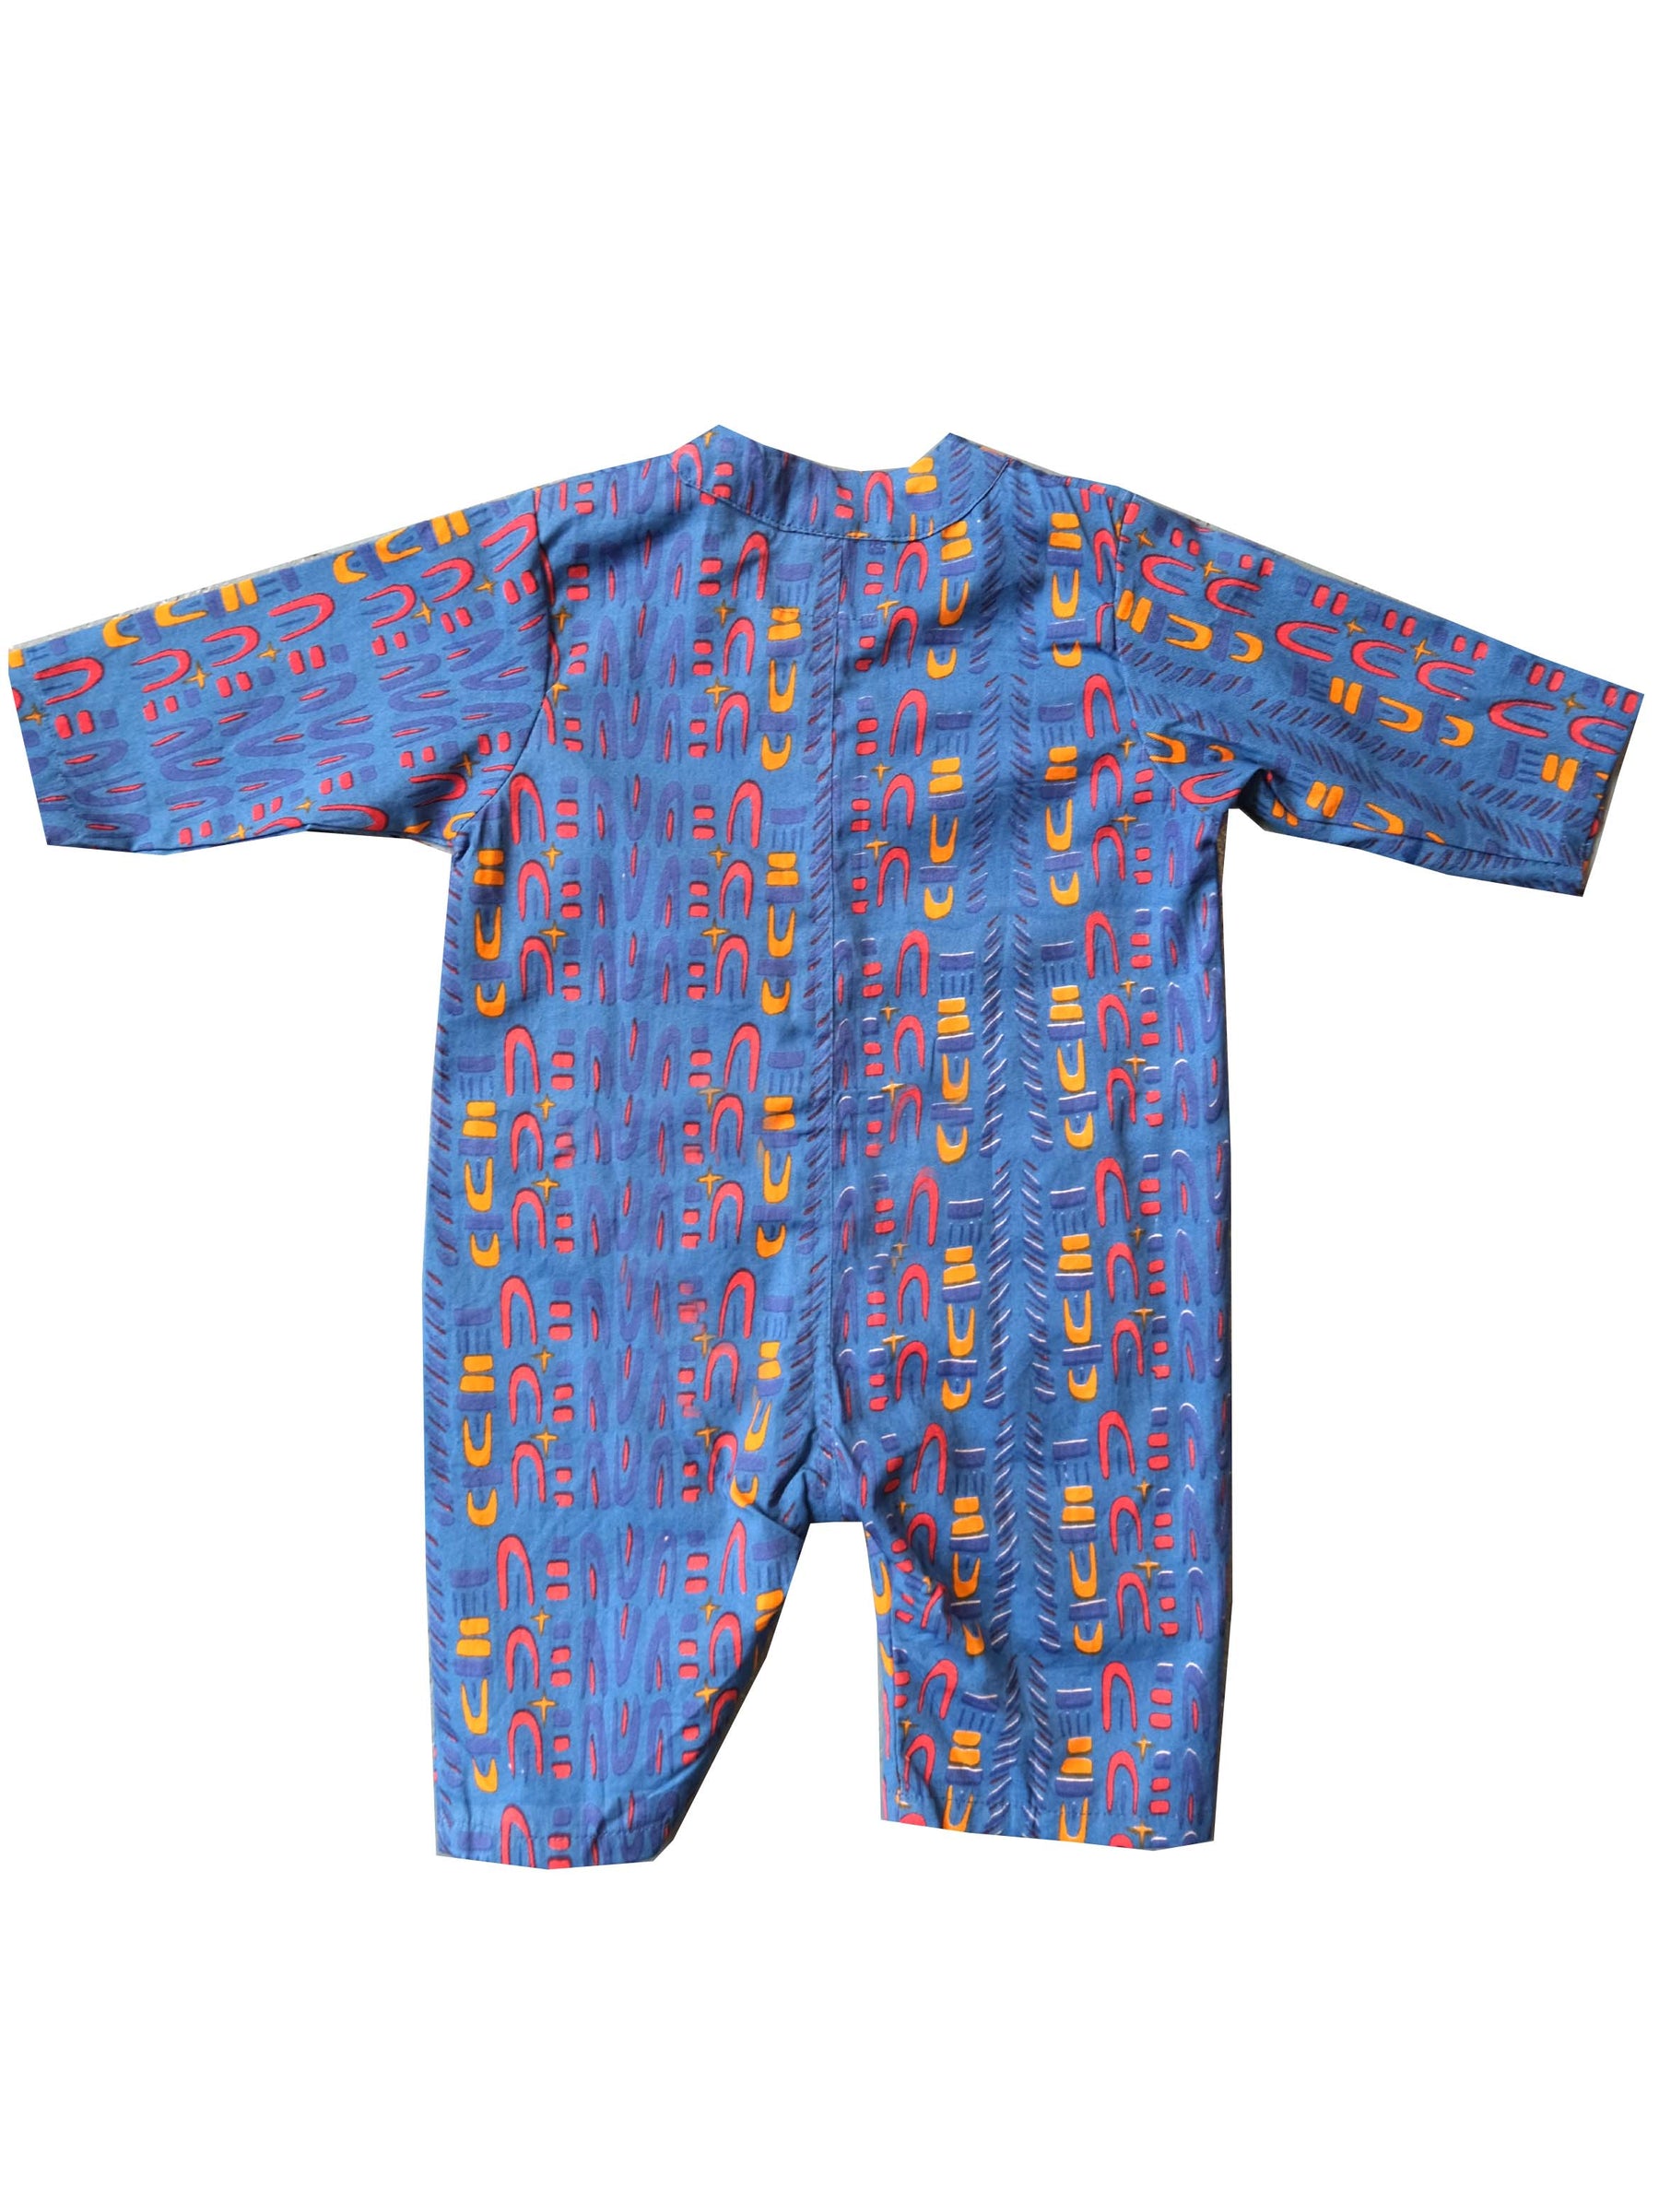 Kids Playsuit in 'Blue Skydive' 0-6yrs